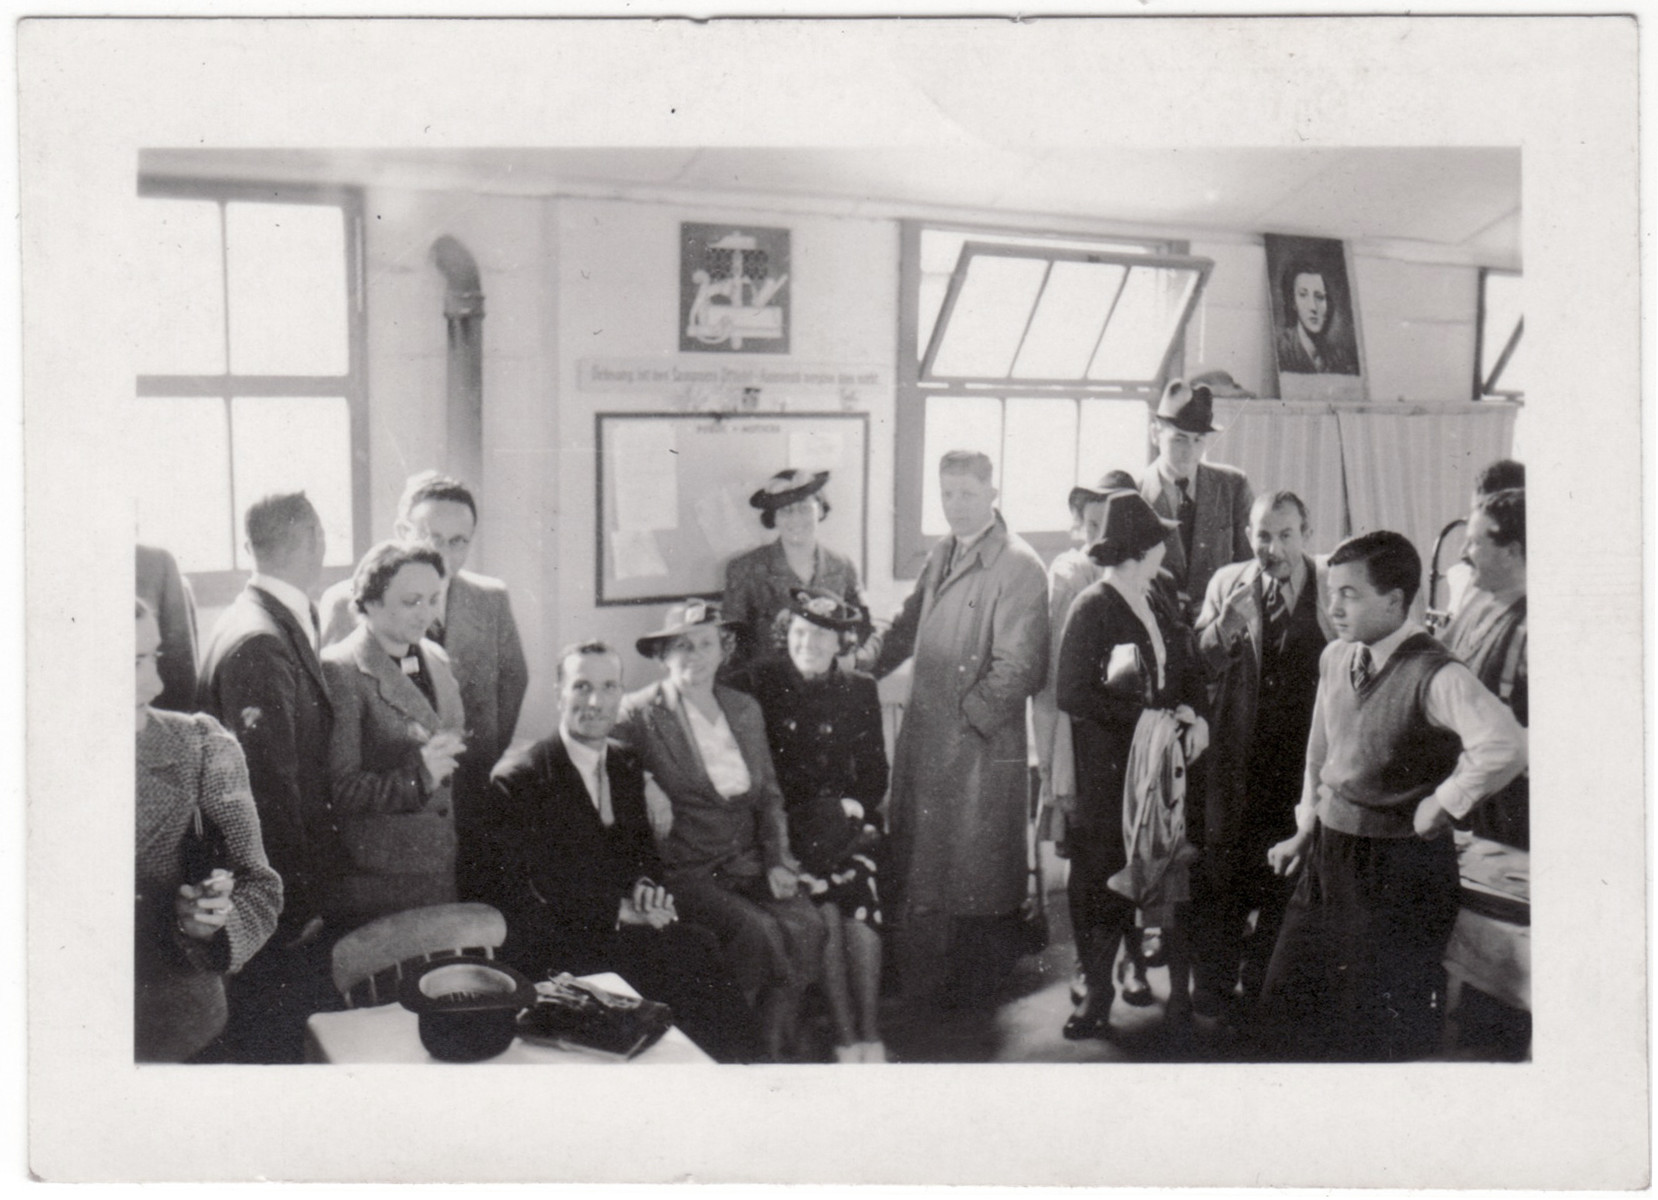 Jewish refugees gather and socialize inside a building of the Kitchener refugee camp.

Among those pictured are Sydney Kulmann (third from the right facing the camera) and [possibly his fiancee Marion Bassfreund] next to him.